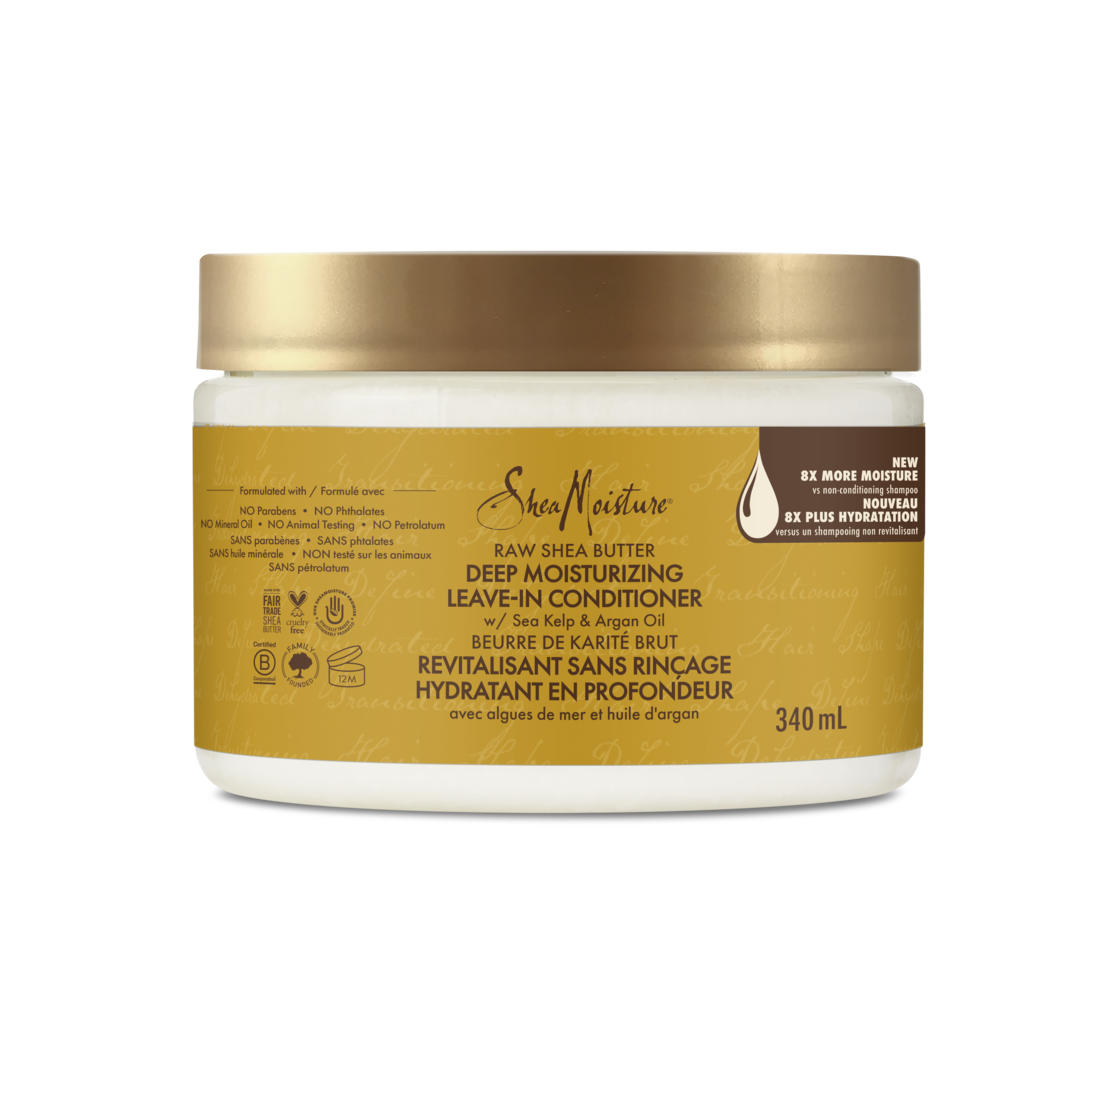 SheaMoisture Raw Shea Butter Leave In Conditioner 340mL